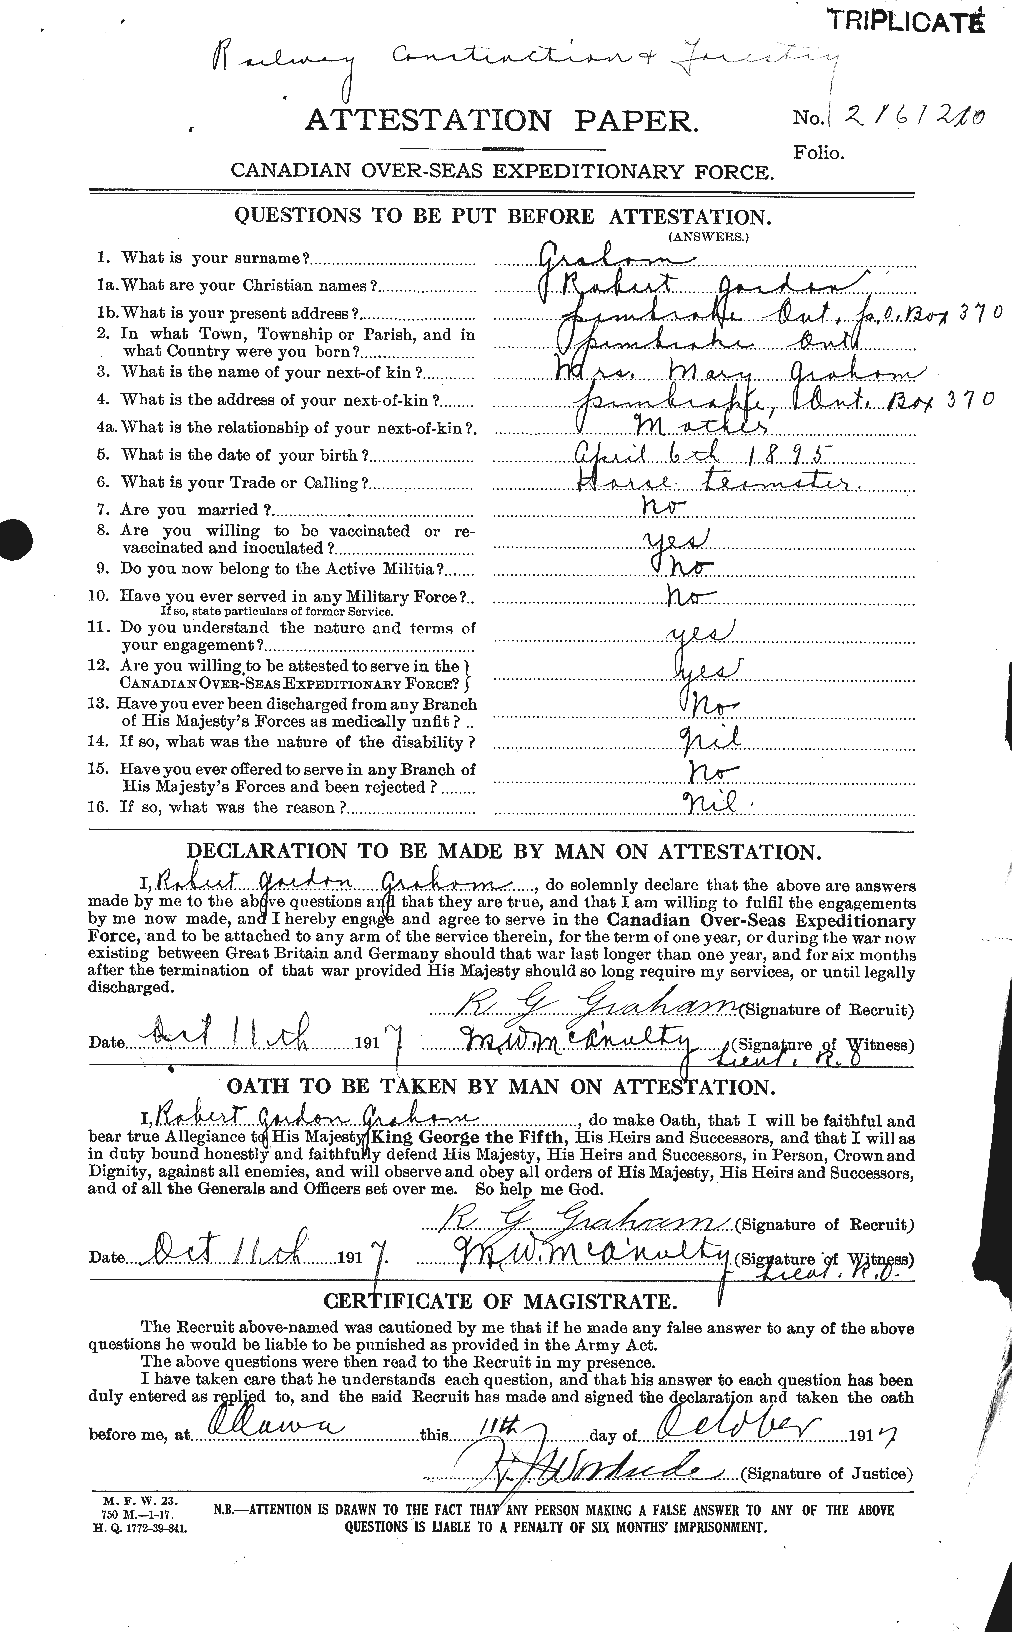 Personnel Records of the First World War - CEF 359414a